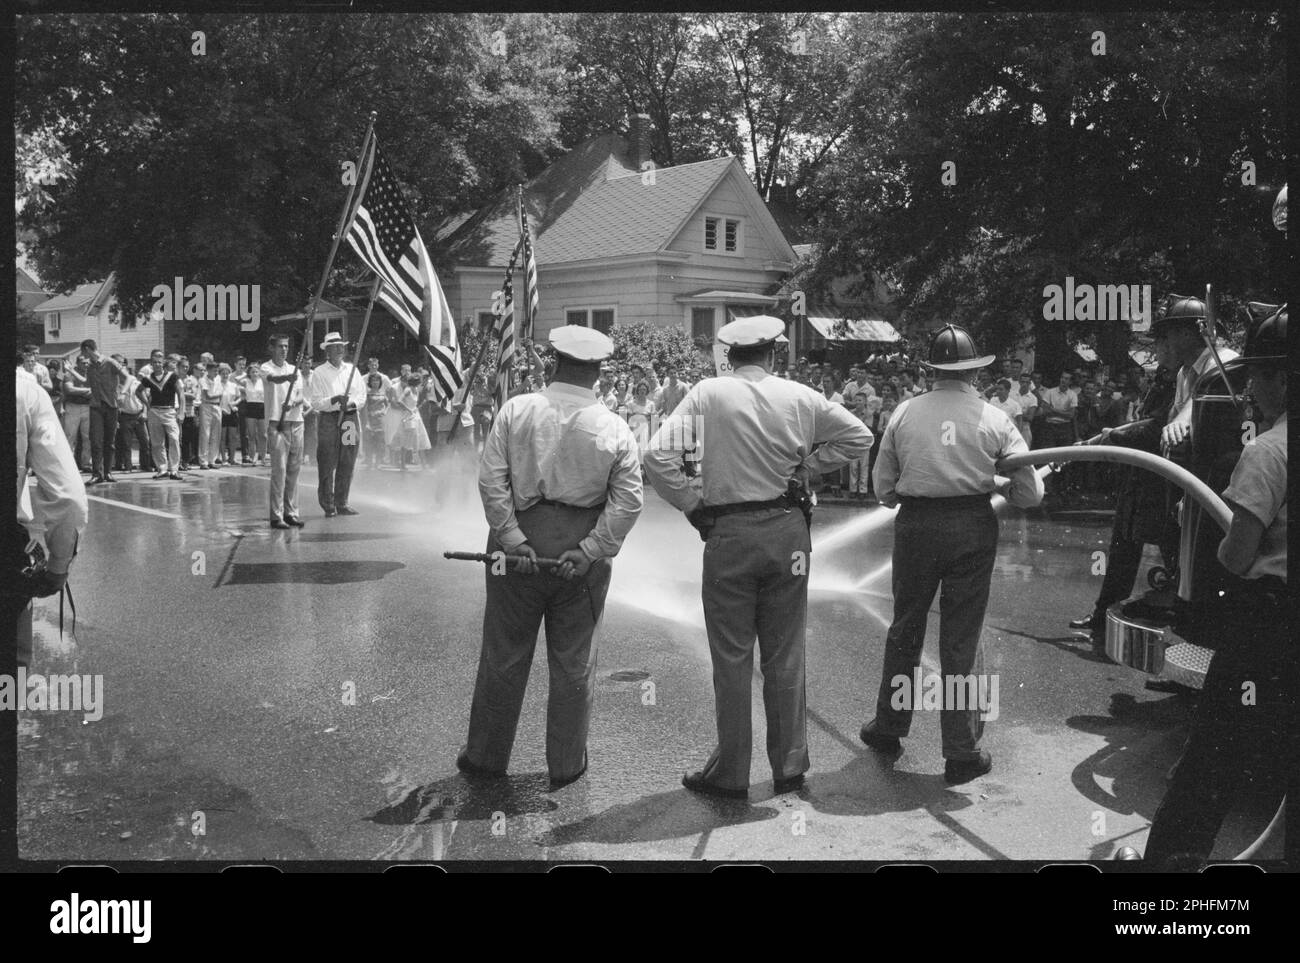 Men holding American flags in protest of the integration of Central High School, stand in street as others watch and police spray them with water from hose, Little Rock, AR, 8/20/1959. (Photo by John T Bledsoe/US News & World Report Magazine Photograph Collection Stock Photo